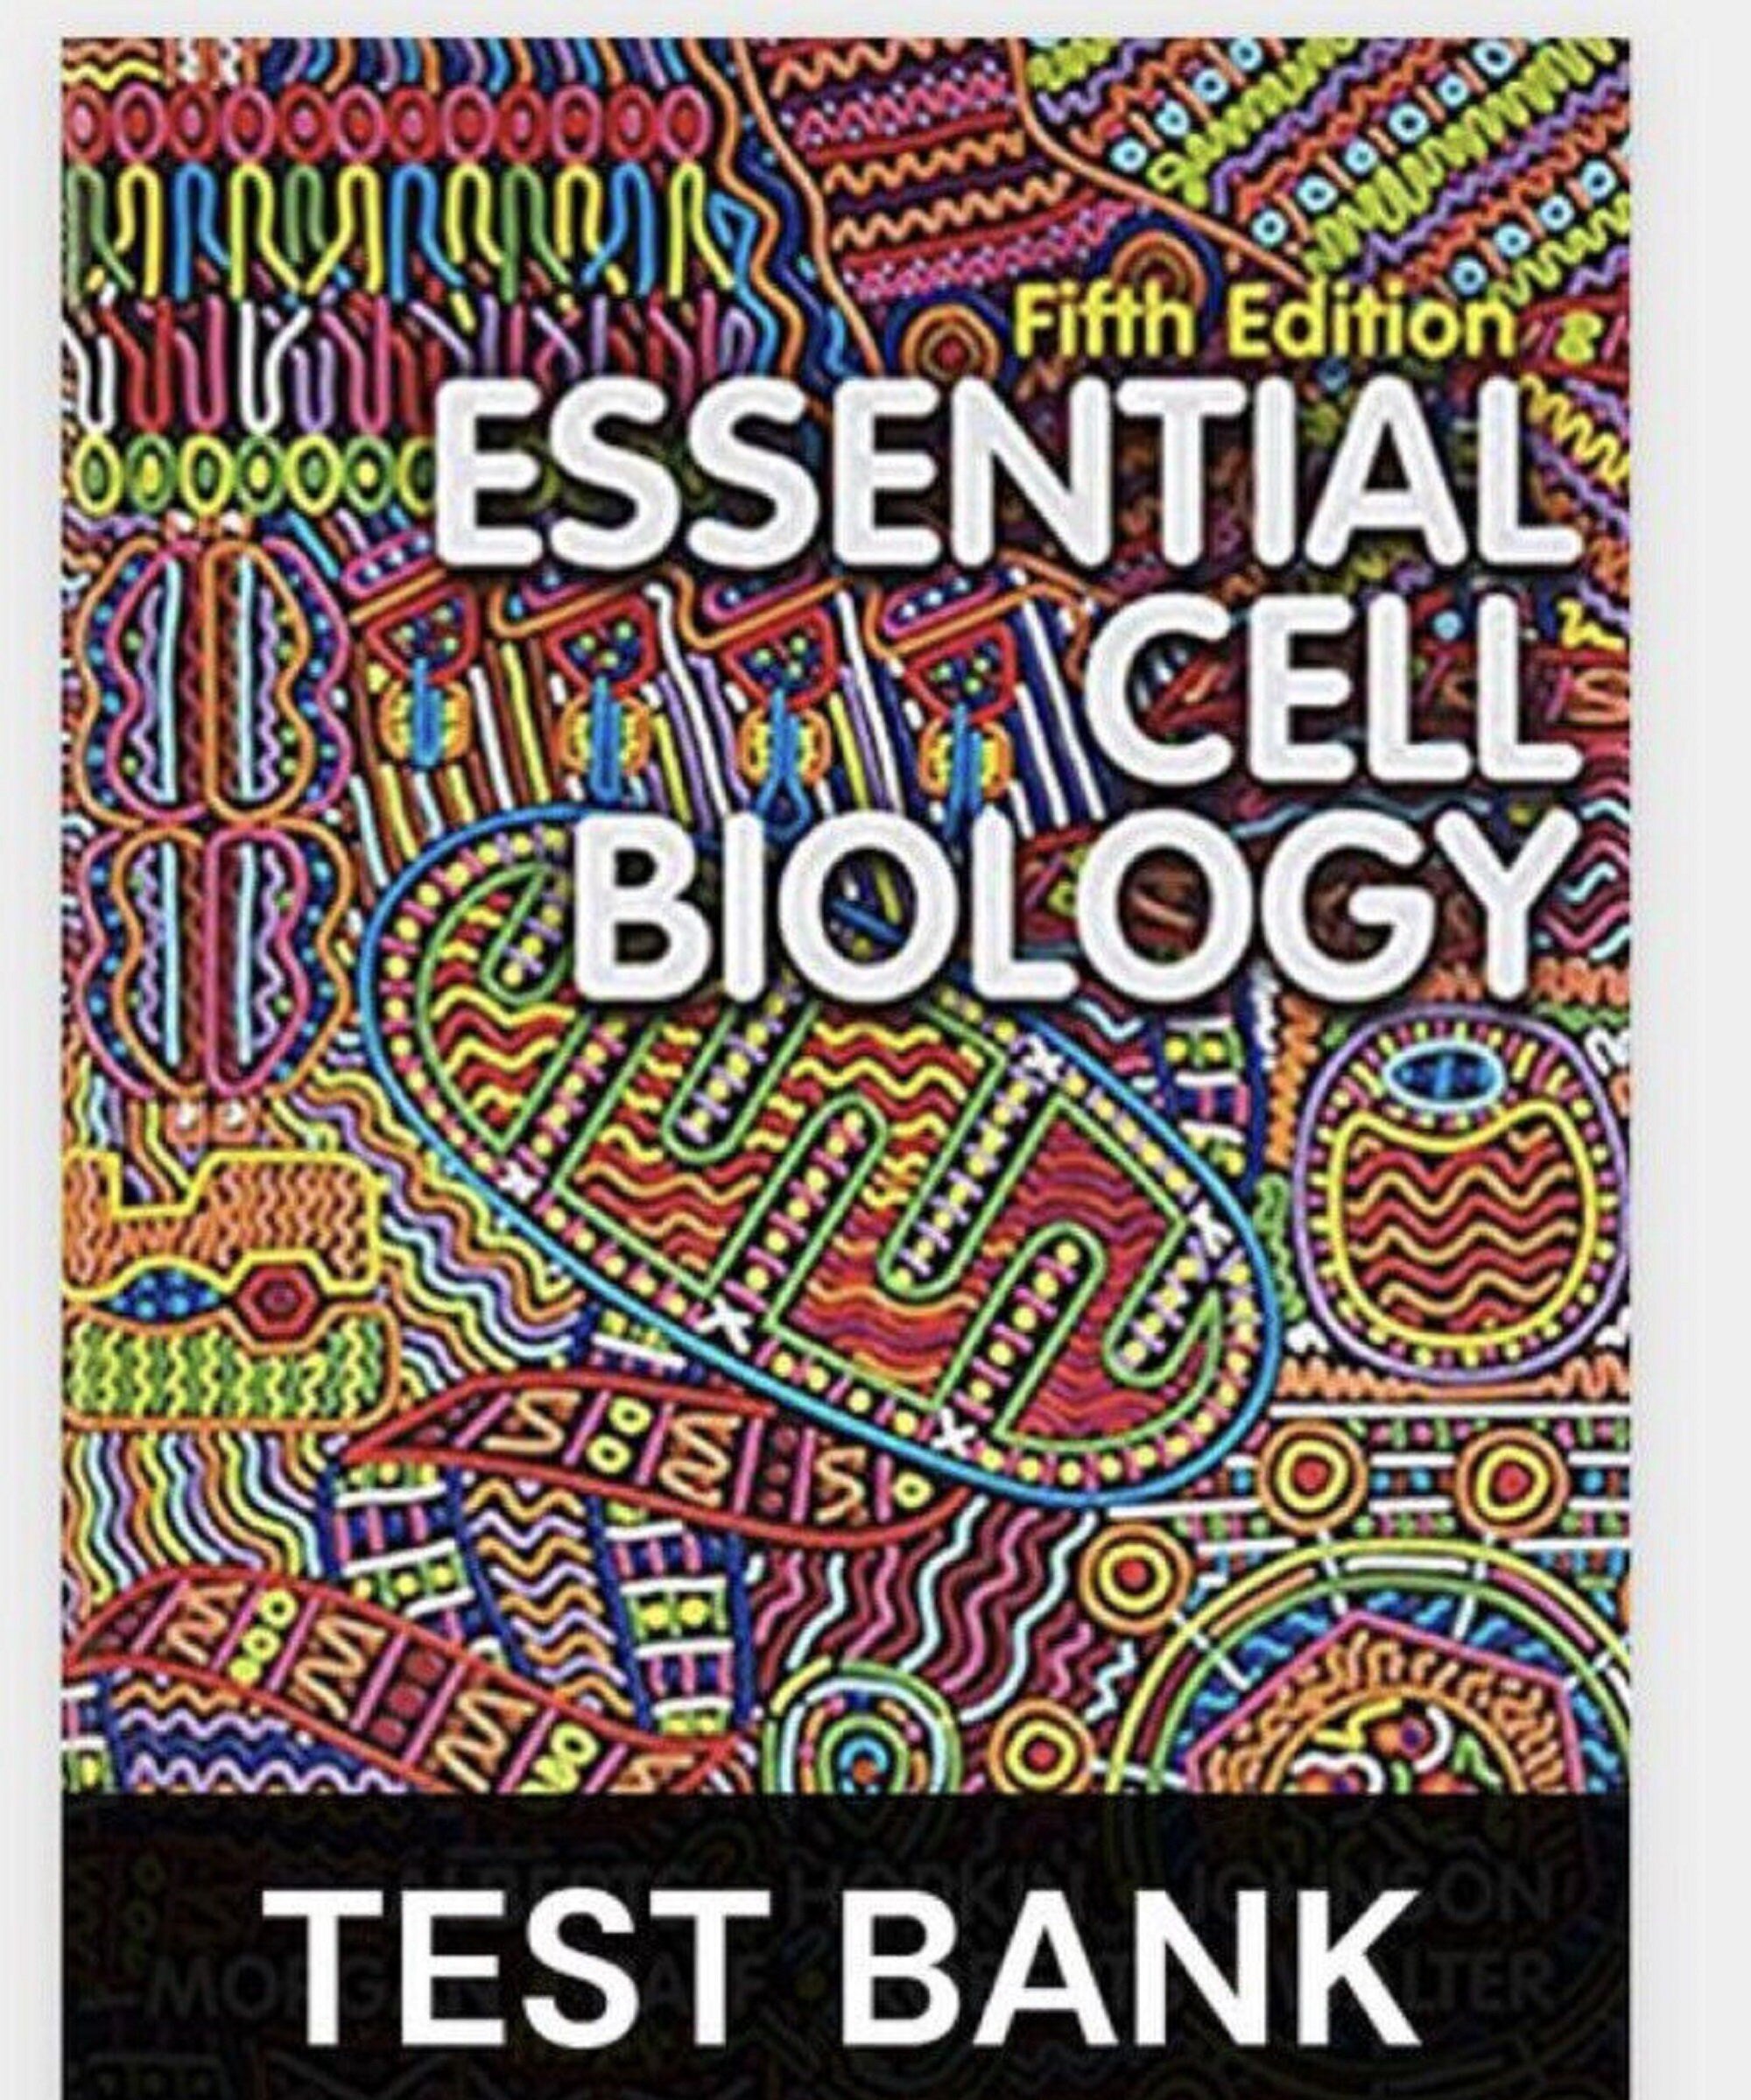 Essential Cell Biology 5th Edition Bruce Alberts Hopkin Test Bank